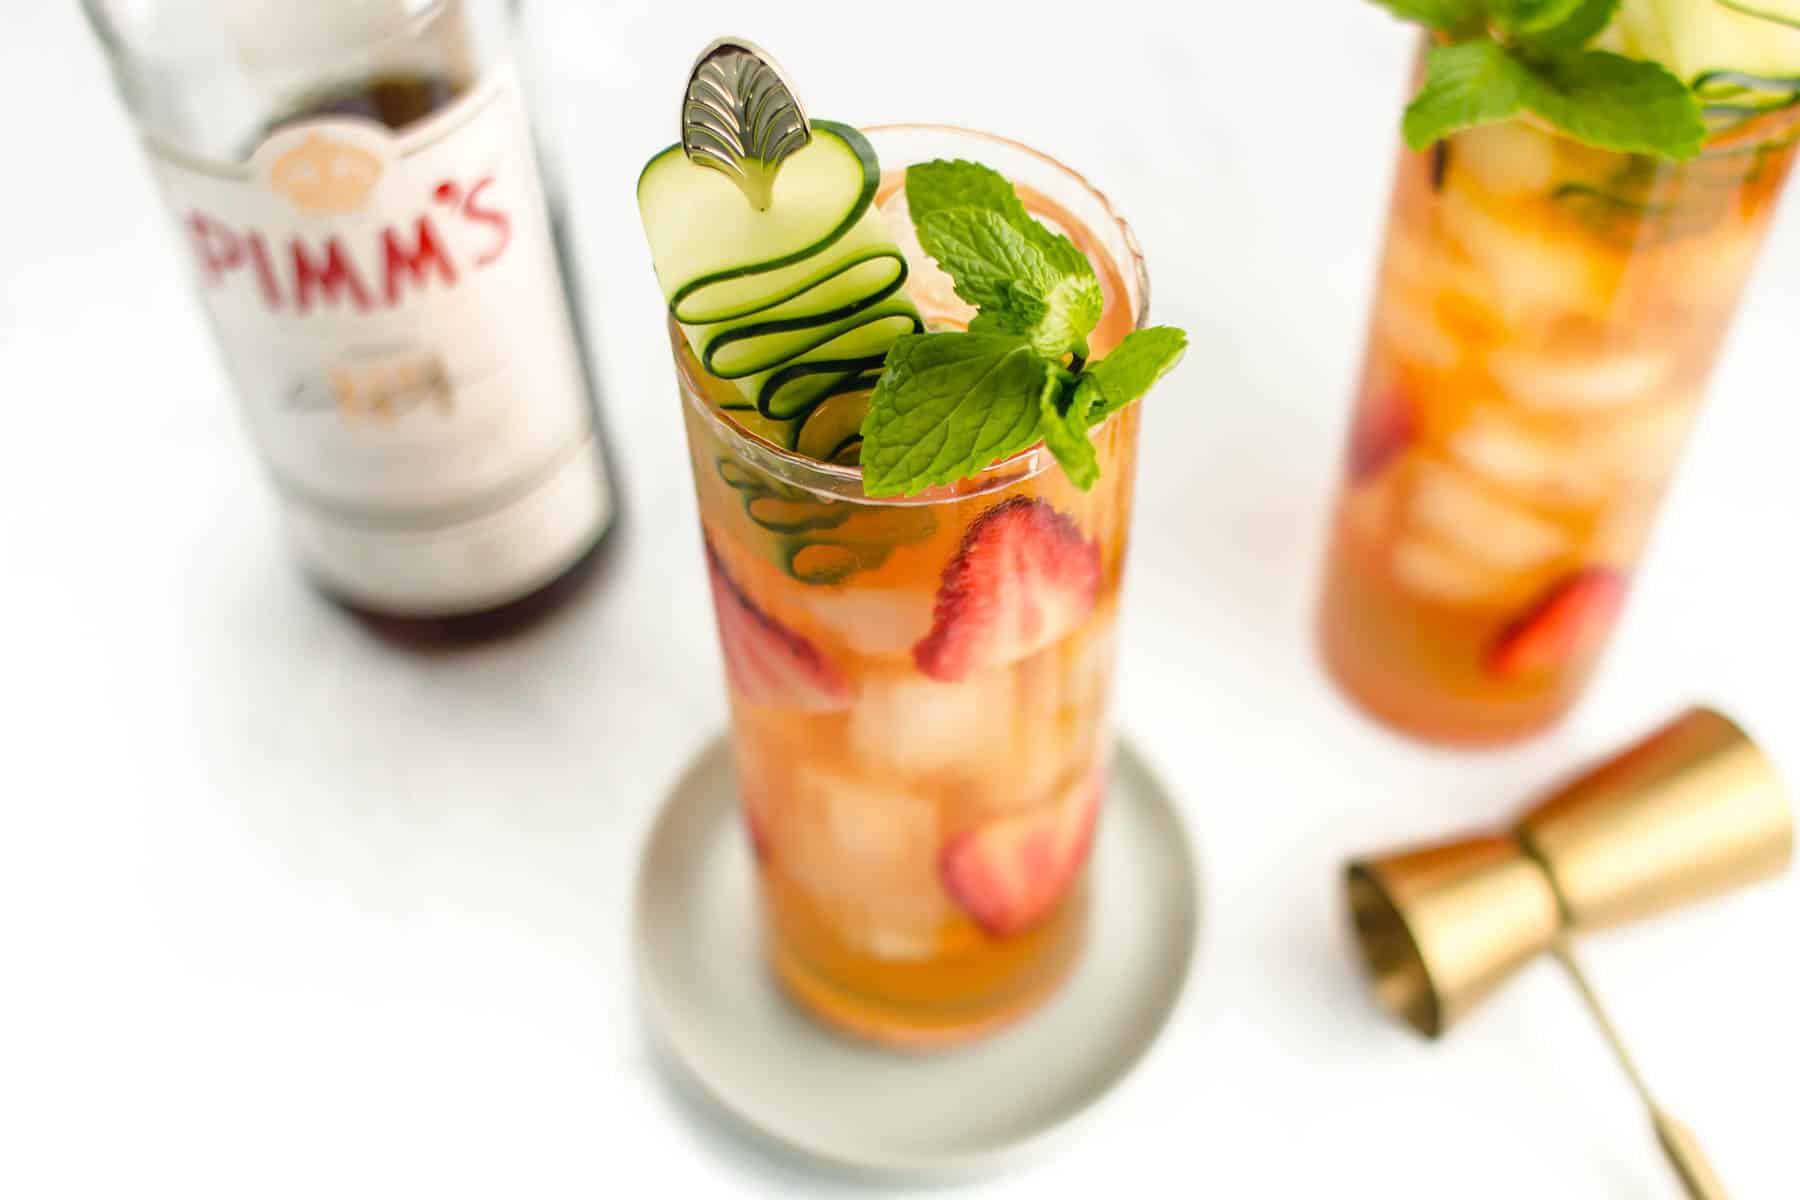 A bottle of Pimm's liqueur sits next to two cocktails.